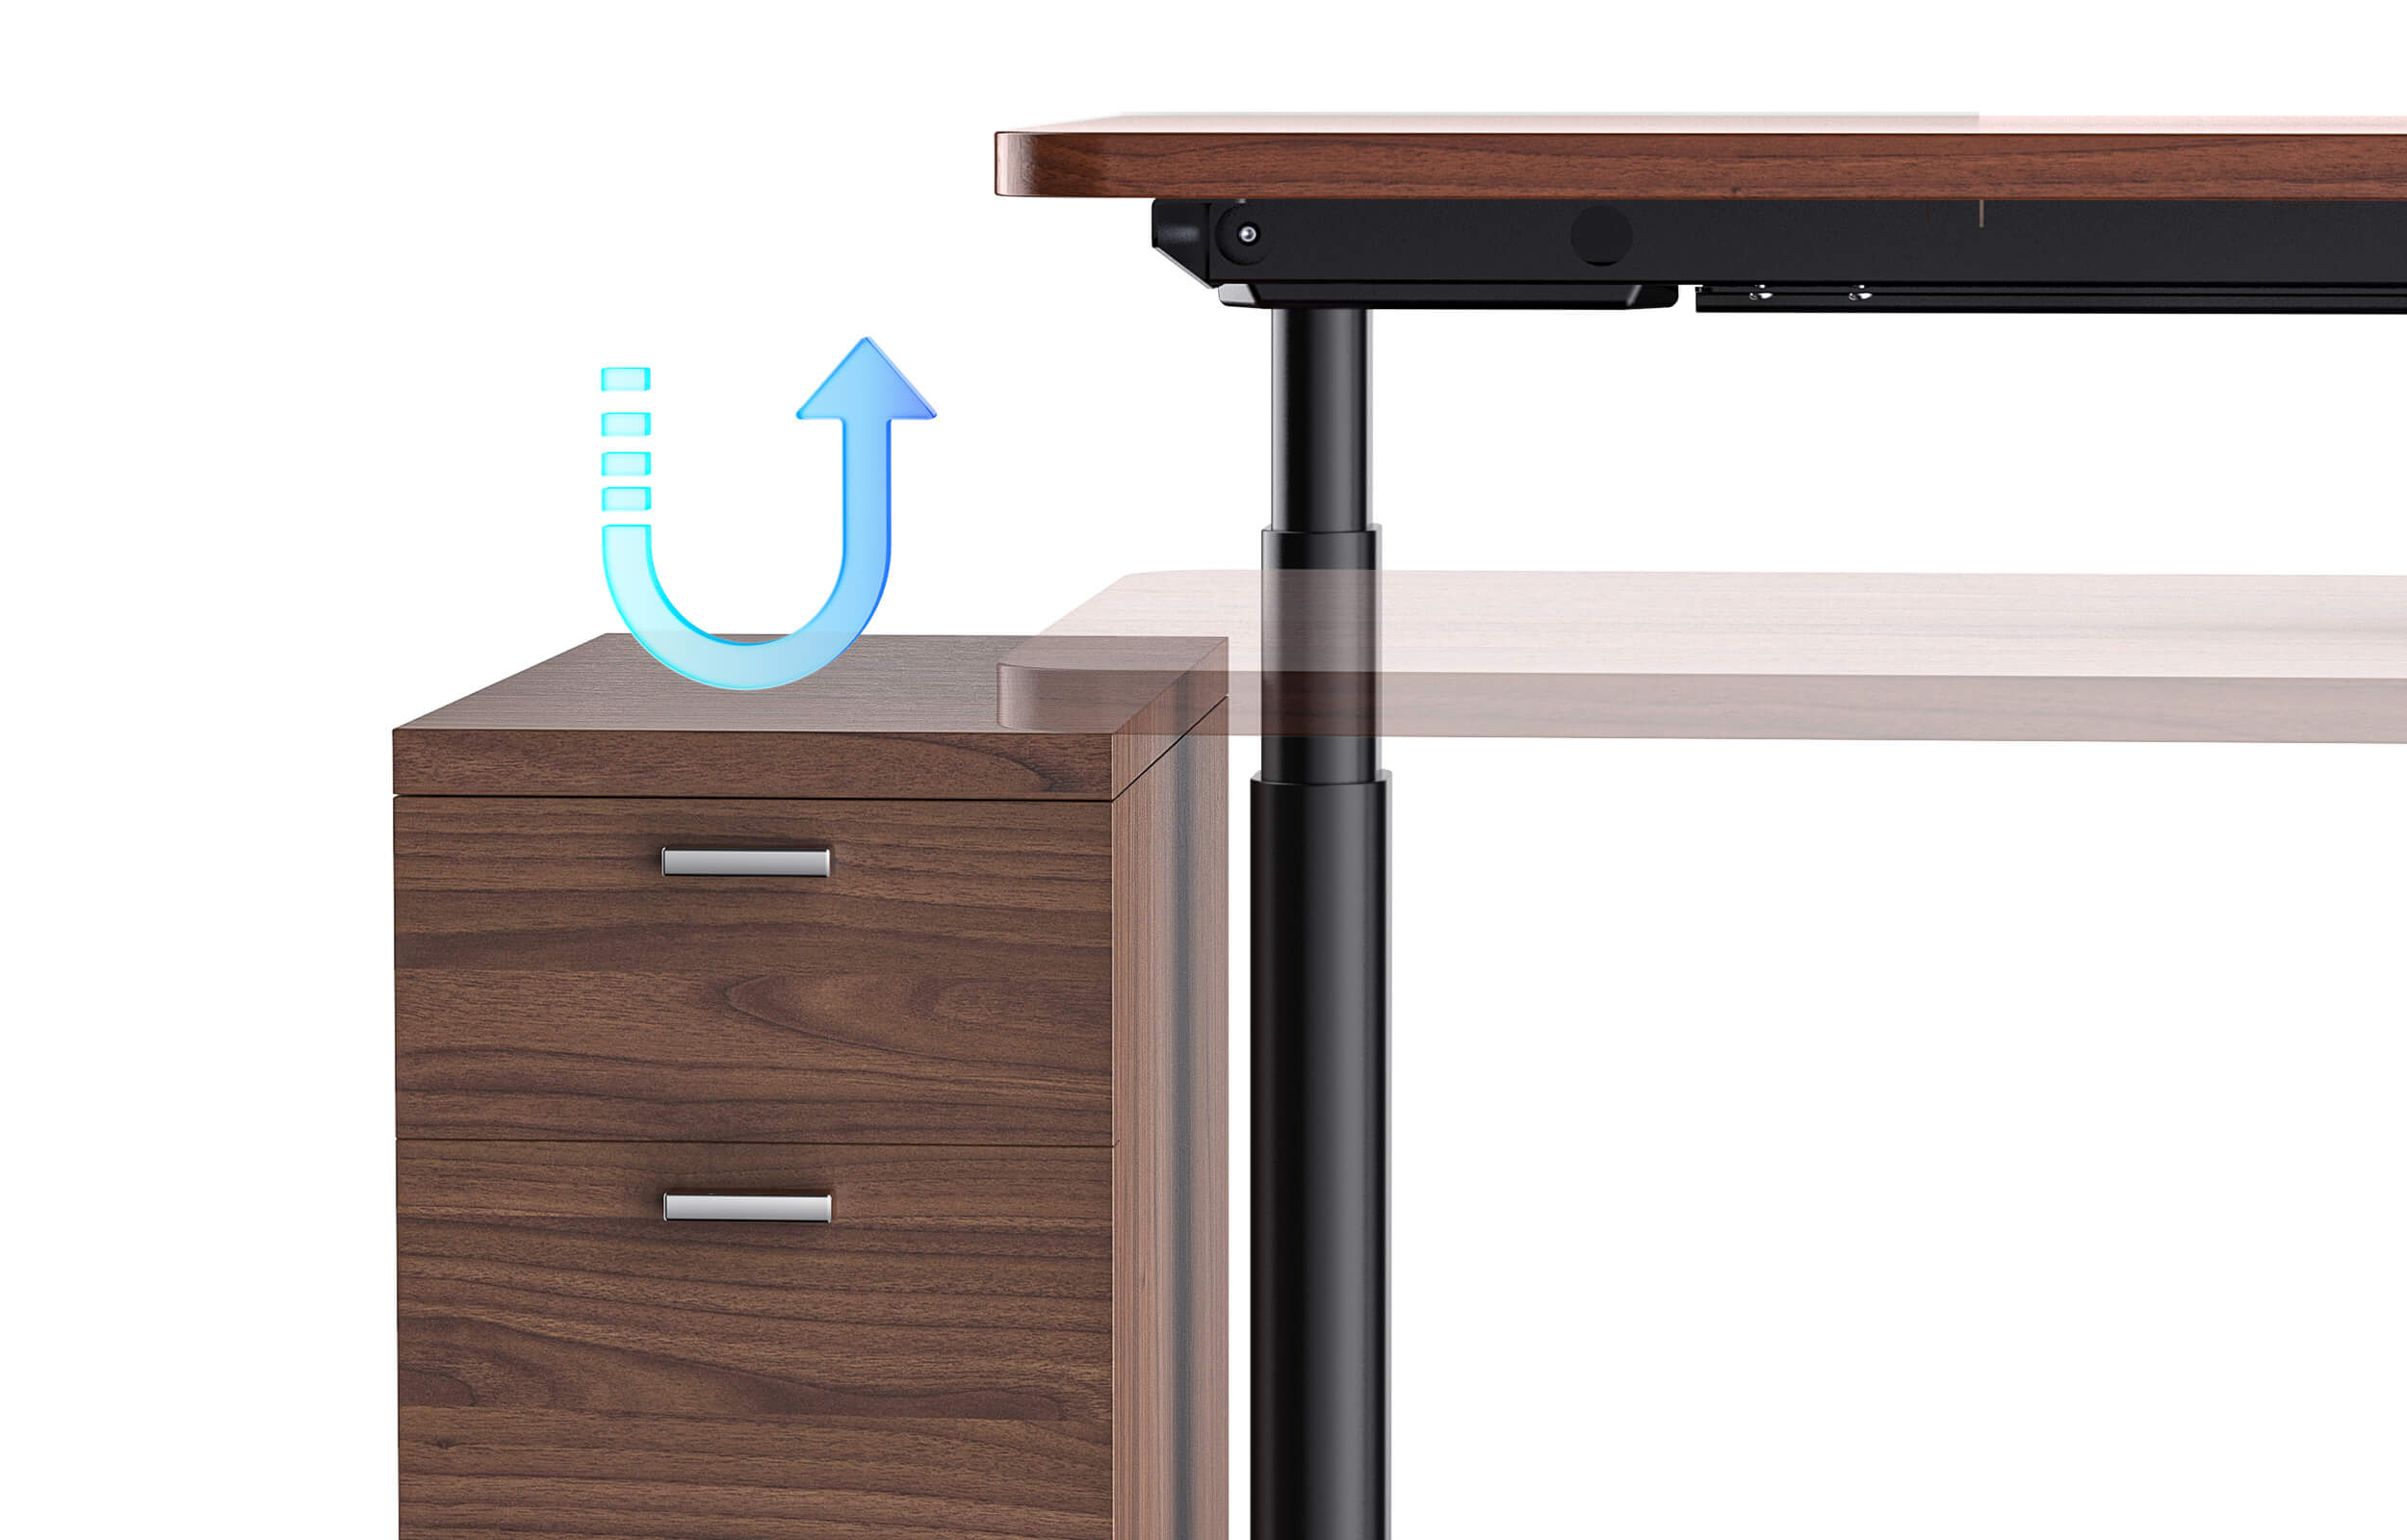 Height adjustable desk comes with anti collision system to protect furniture and pets